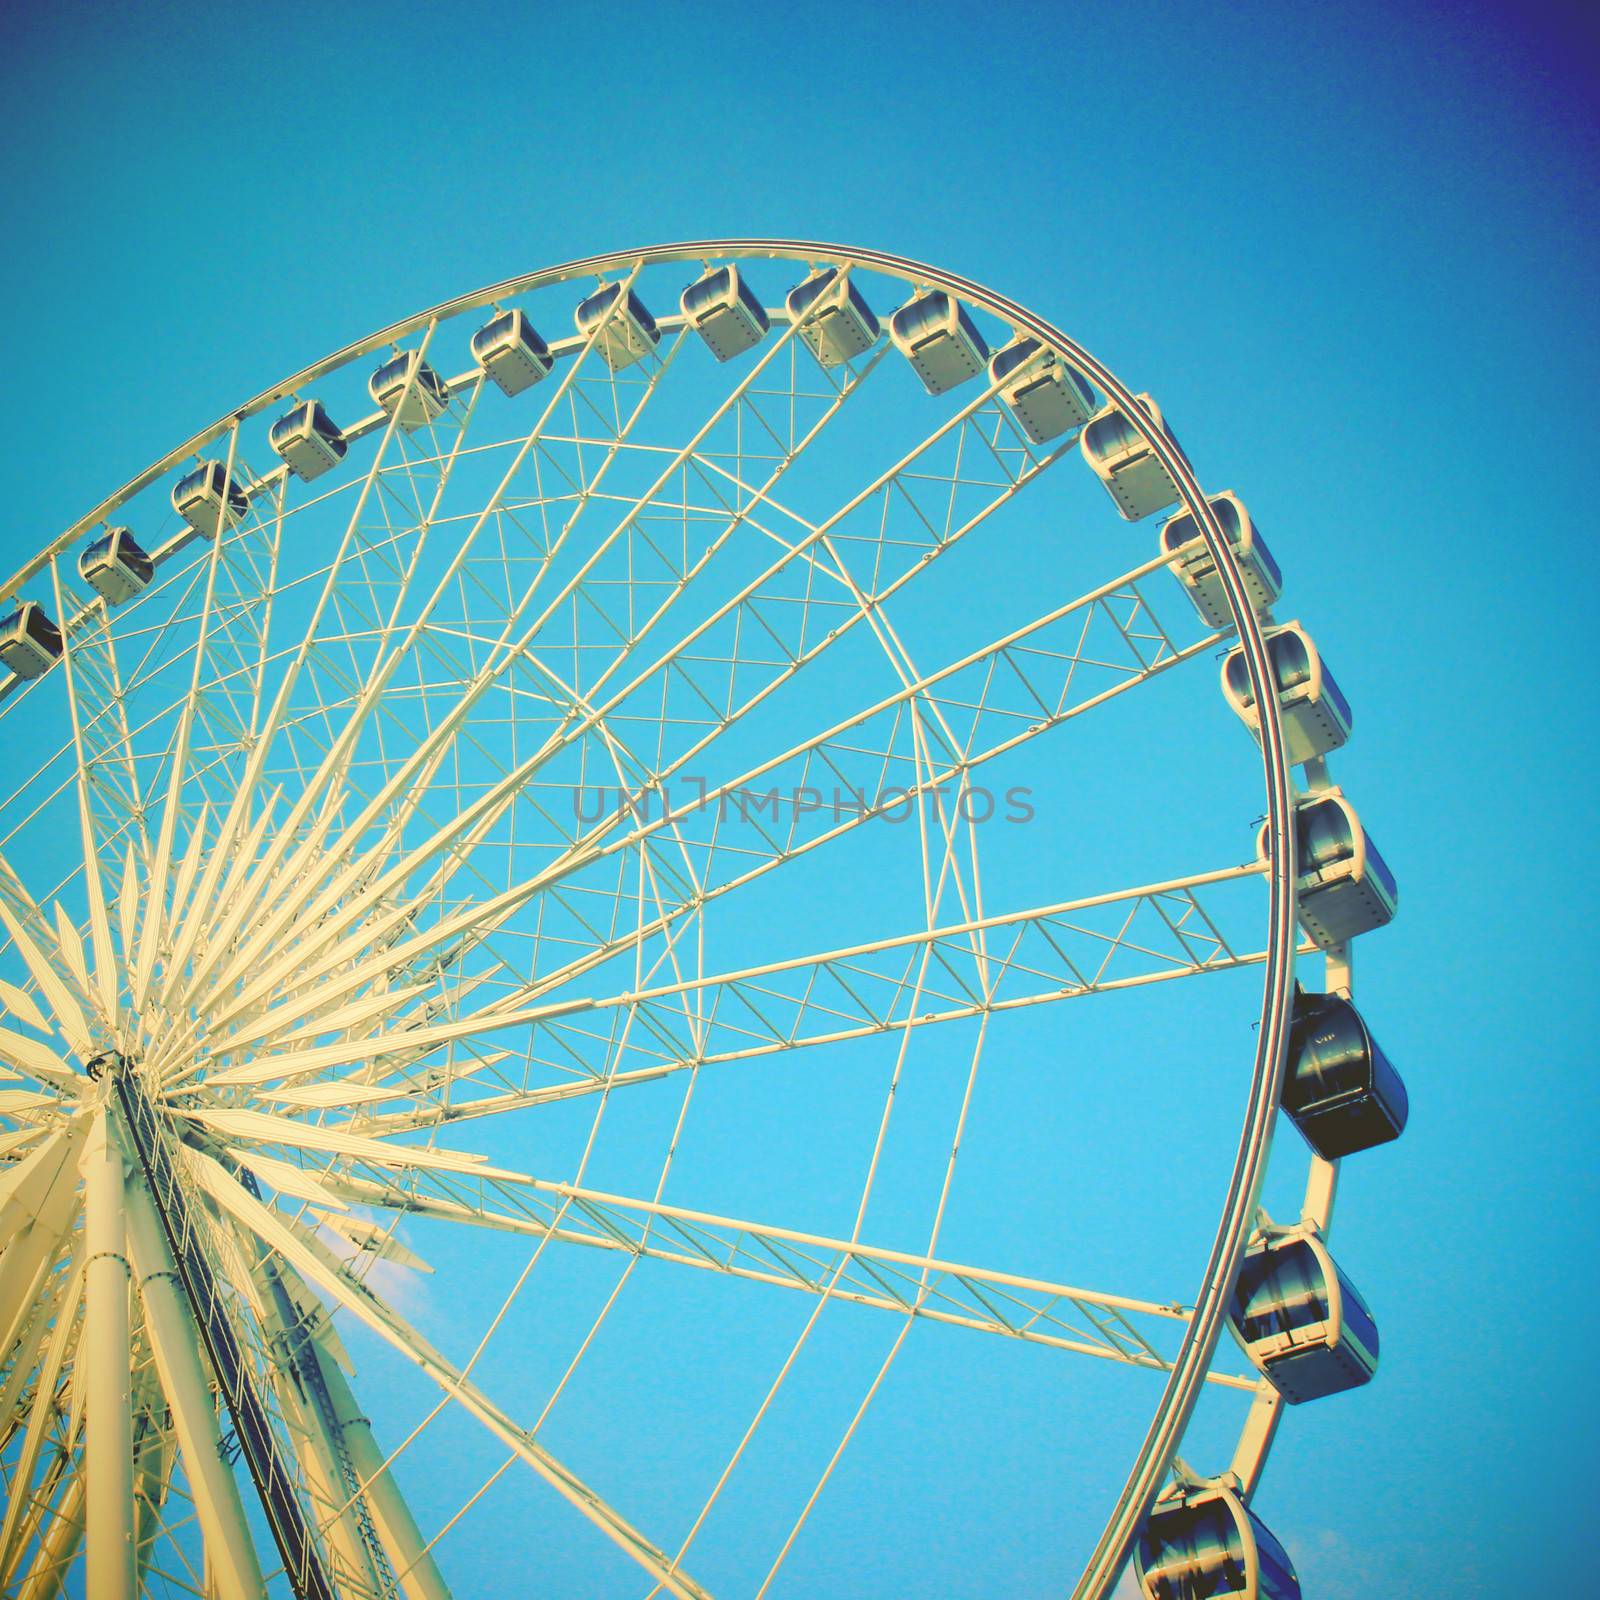 Ferris wheel with filter effect